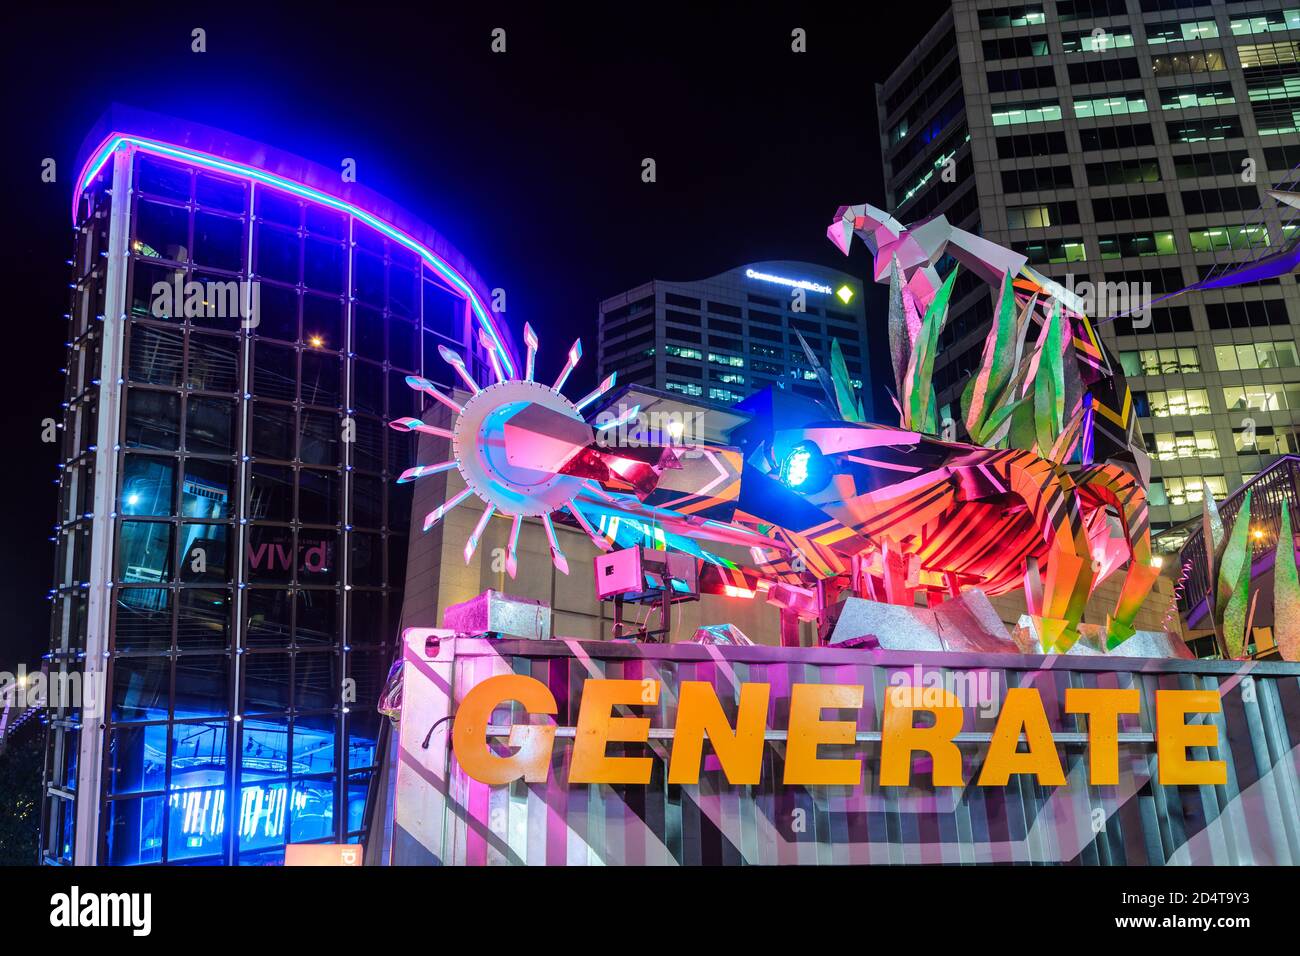 A brightly lit sculpture of a robotic scorpion, part of the annual 'Vivid Sydney' festival displays in Sydney, Australia. May 28 2019 Stock Photo